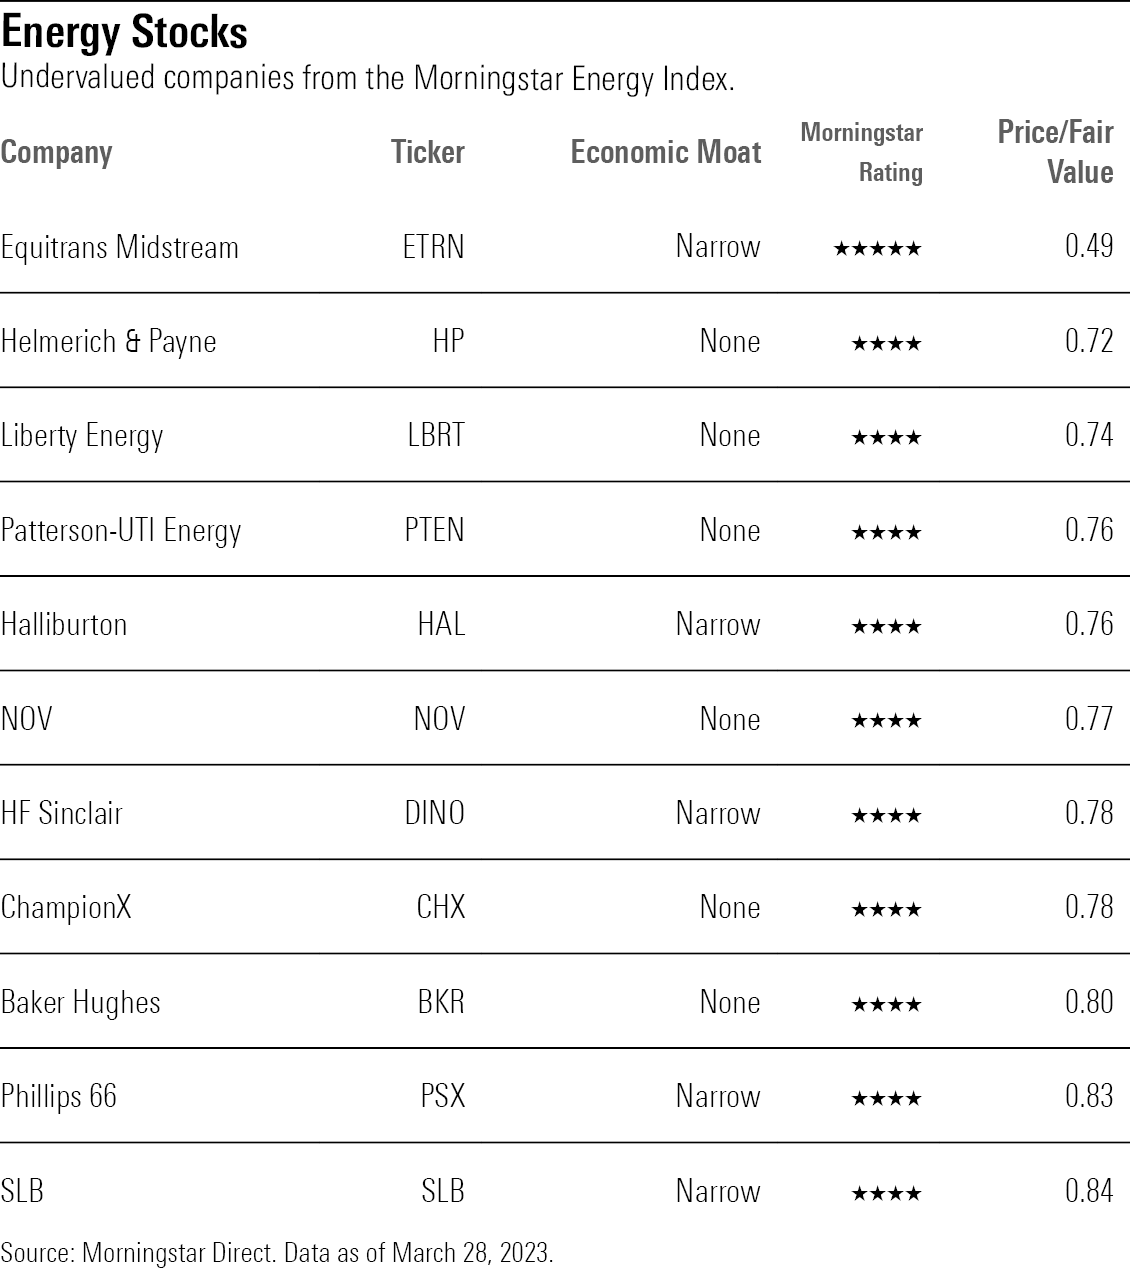 Full list of undervalued companies from the Morningstar US Energy Index.